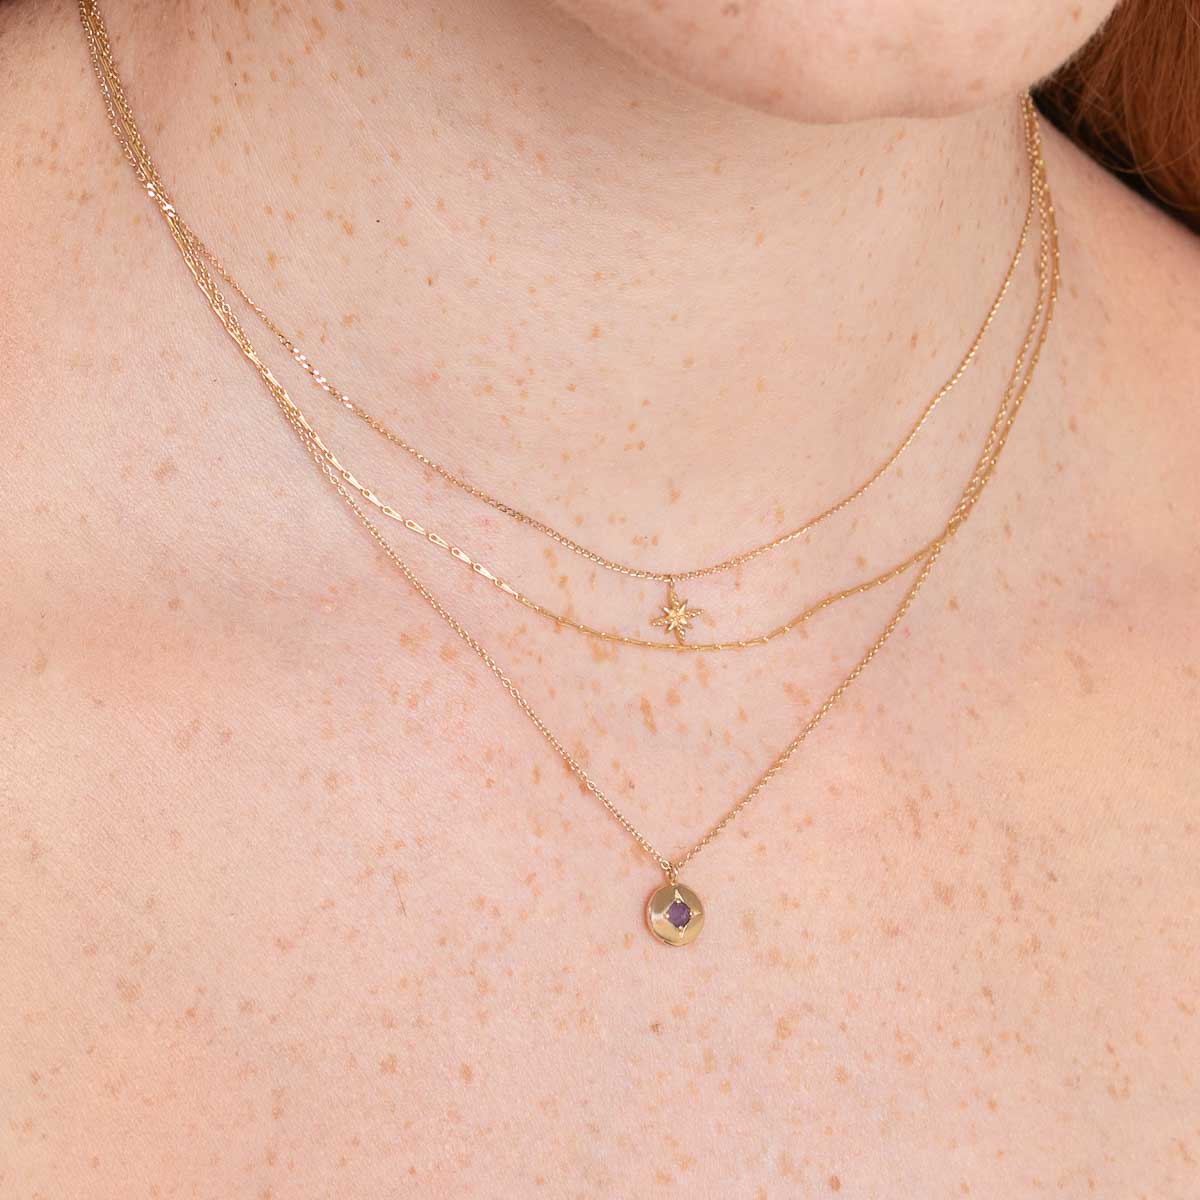 February Birthstone Necklace in Solid Gold